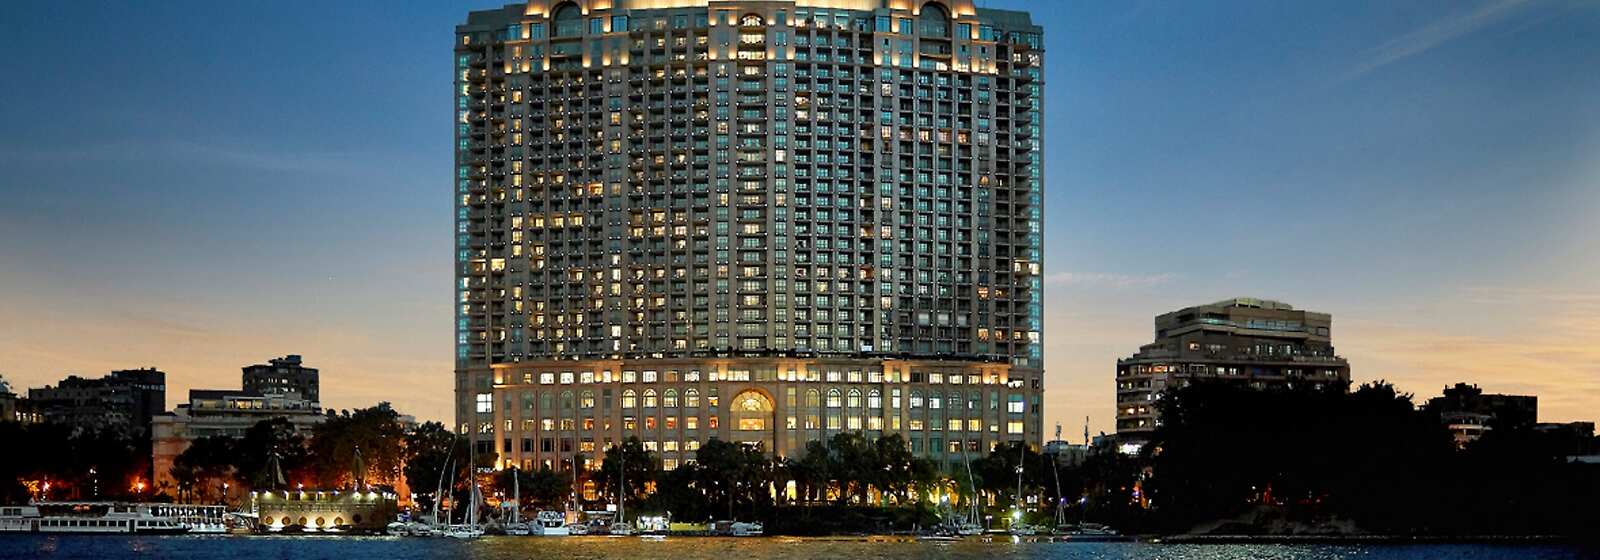 FOUR SEASONS CAIRO NILE PLAZA the heartbeat of the Nile, minutes away from historic and modern Cairo